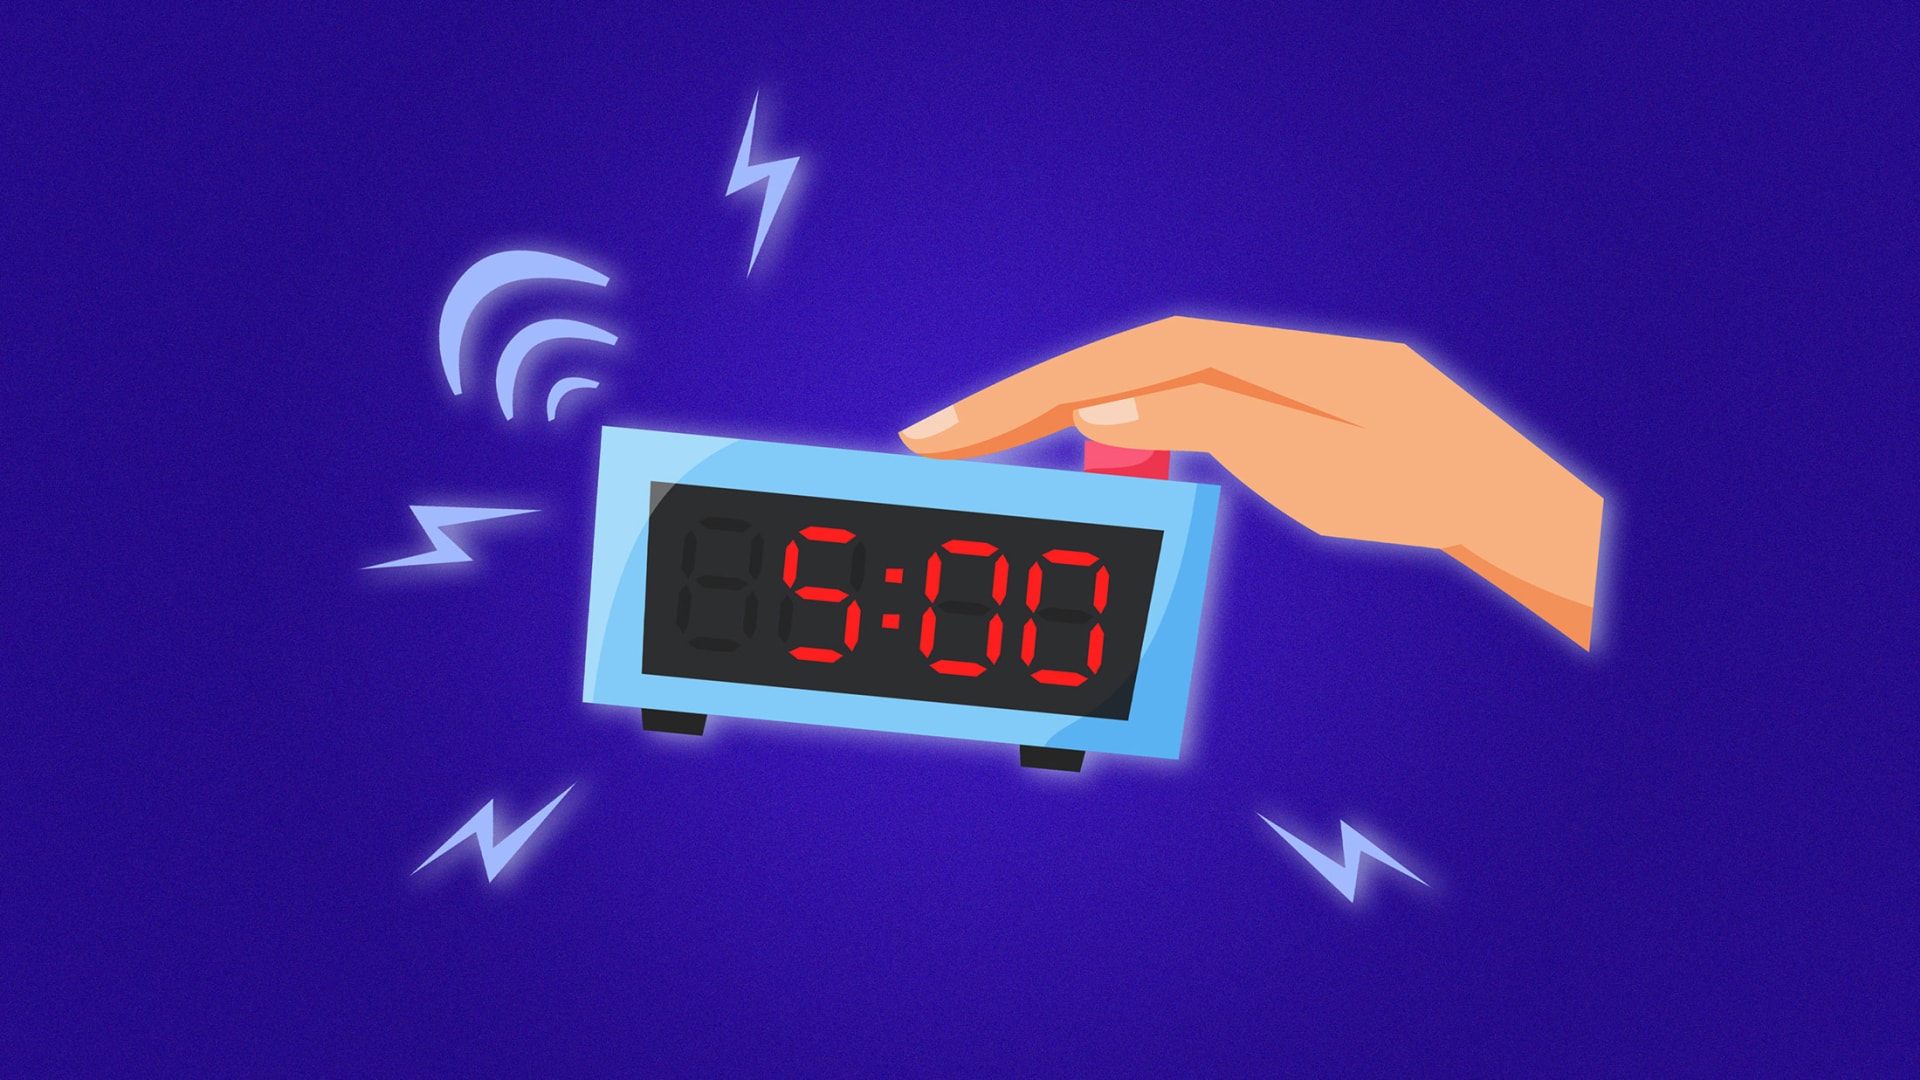 Millions of People Hit the Snooze Button Every Morning. Here's Why Science Says That's a Problem